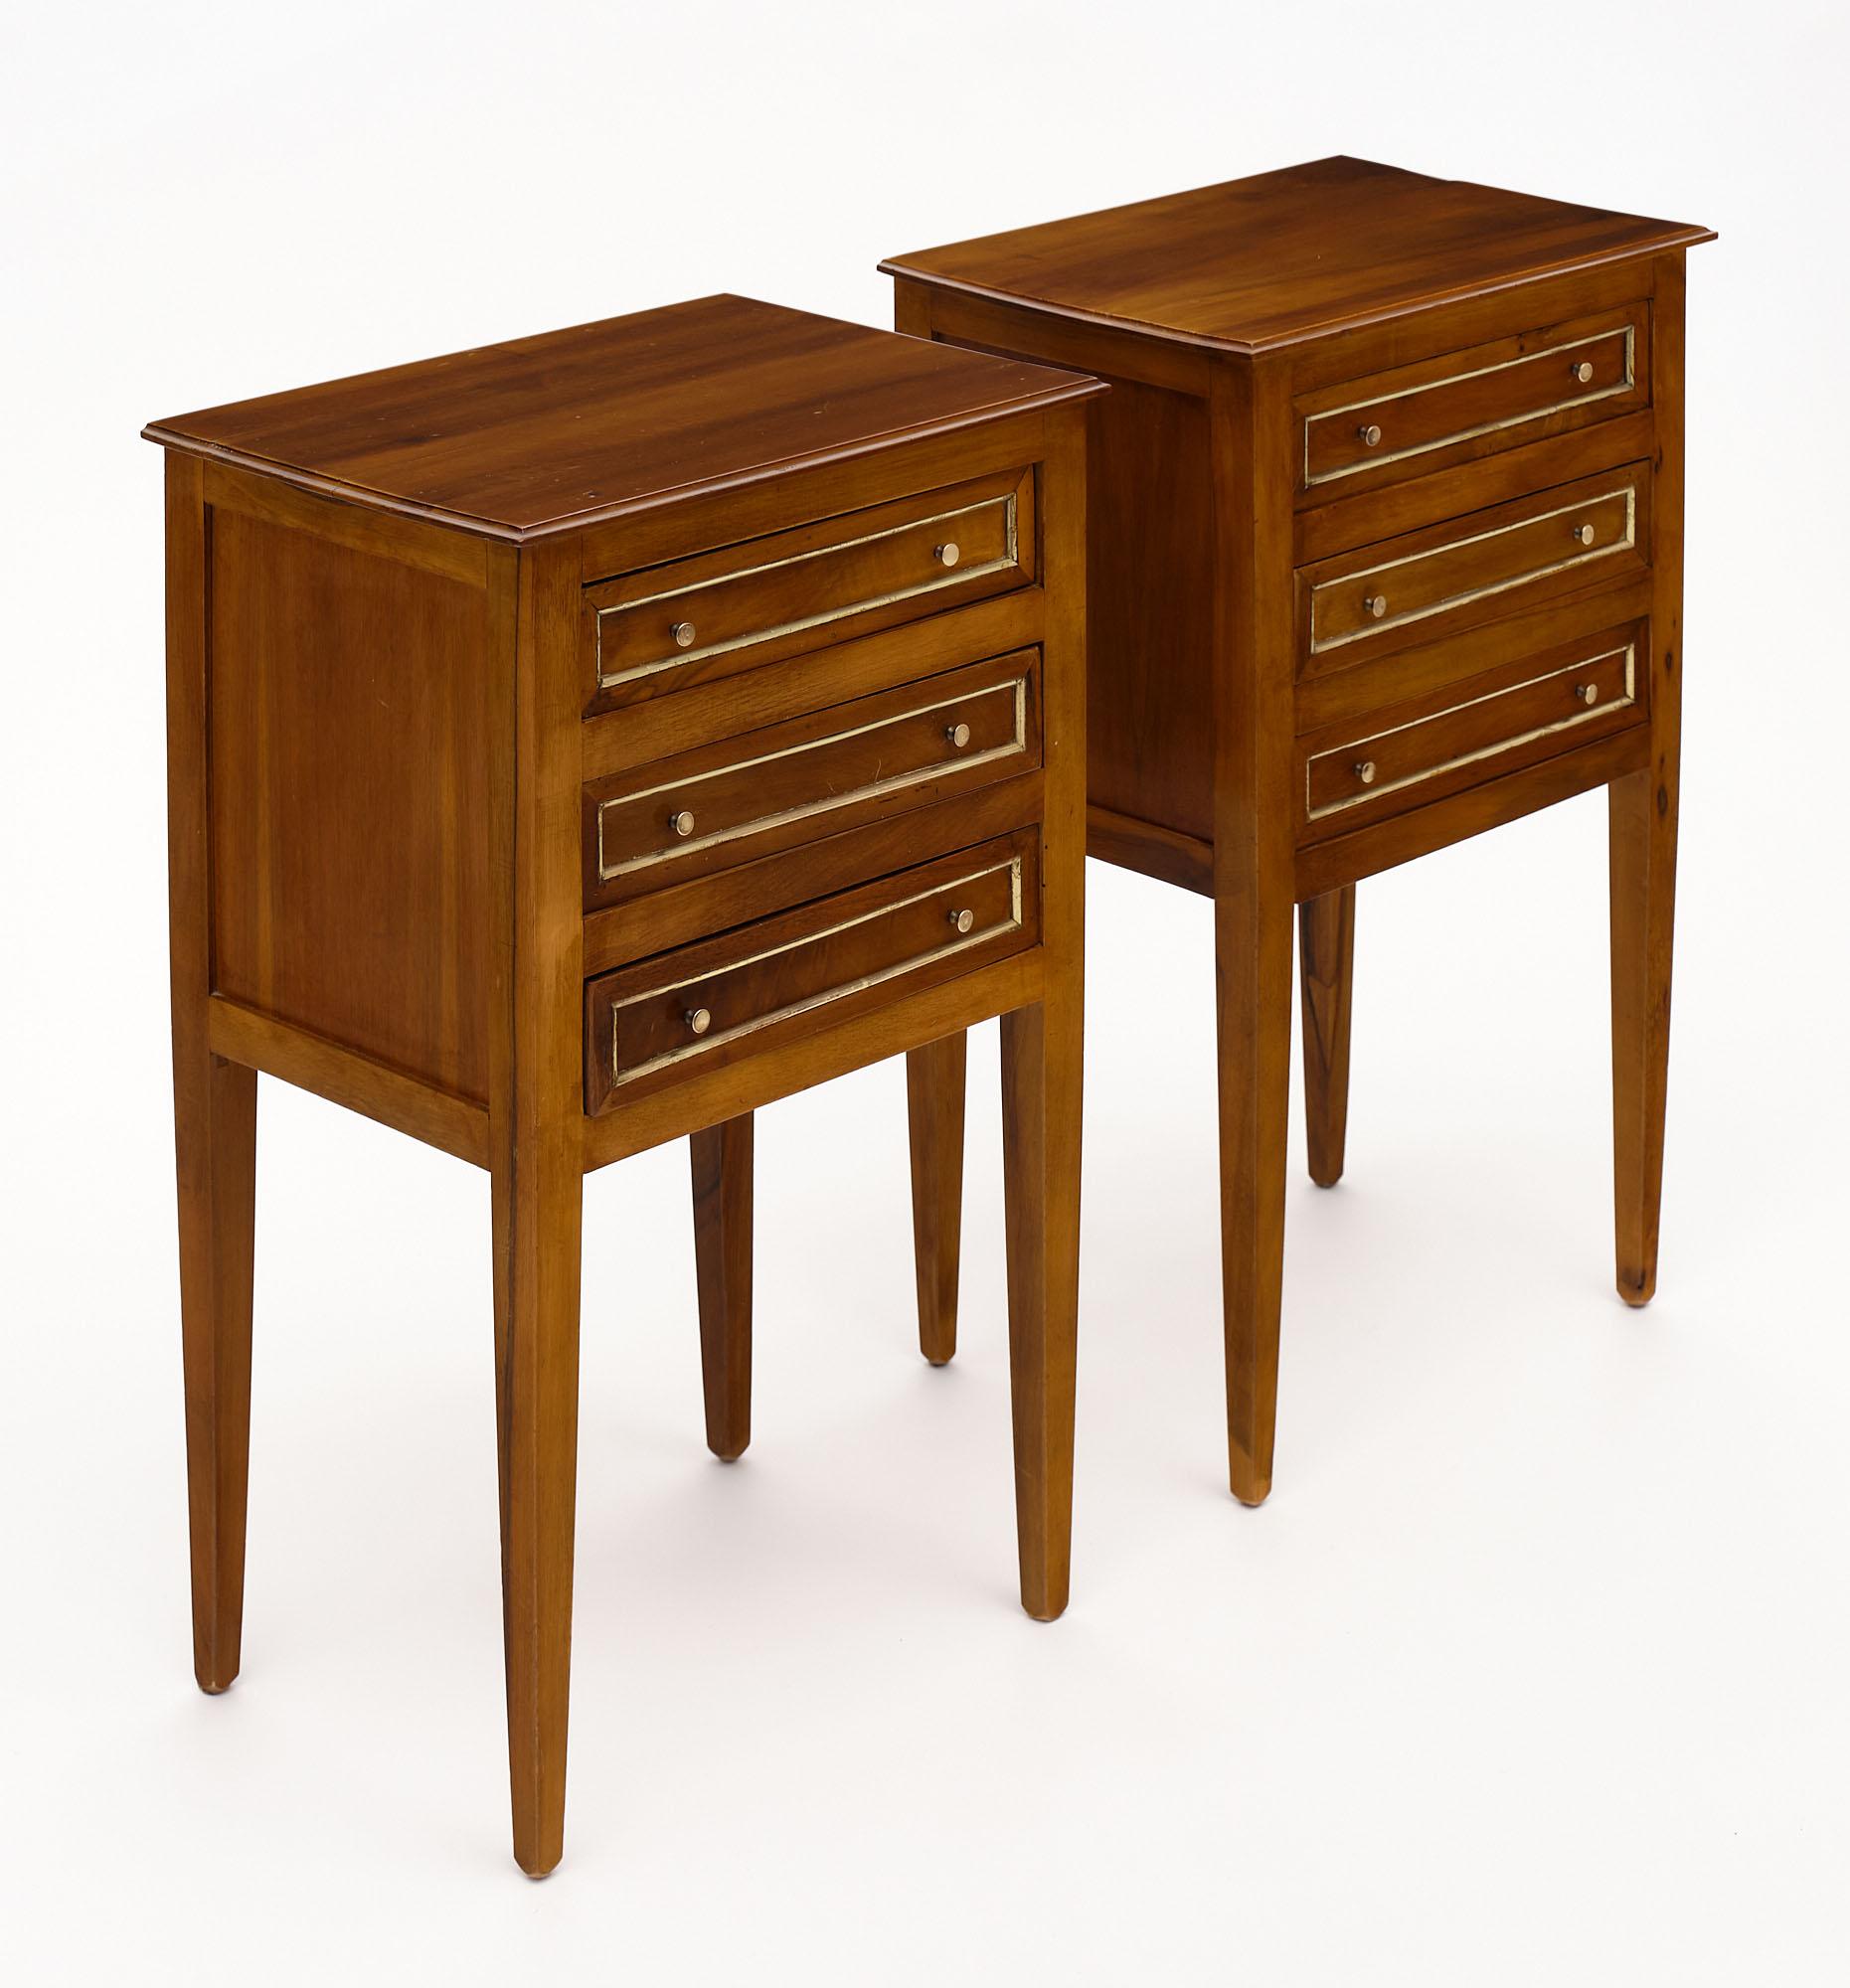 Pair of bed side tables from France made of walnut with tapered legs. Each cabinet features three dovetailed drawers all trimmed in gilt brass.